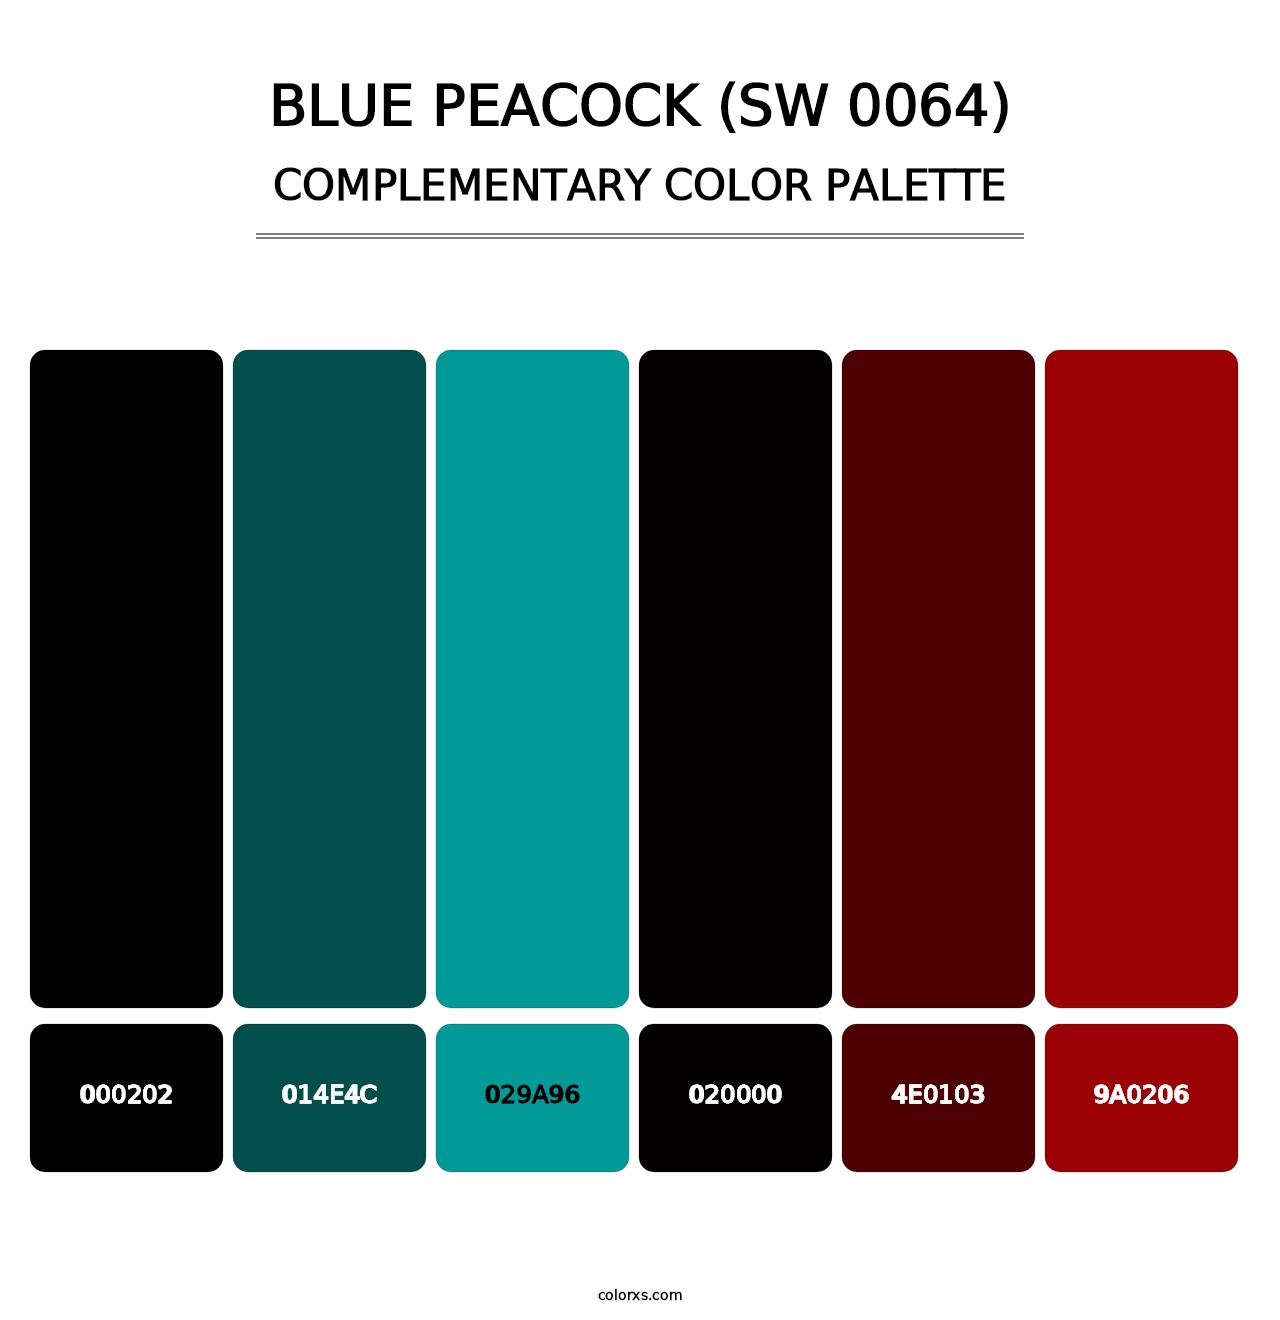 Blue Peacock (SW 0064) - Complementary Color Palette